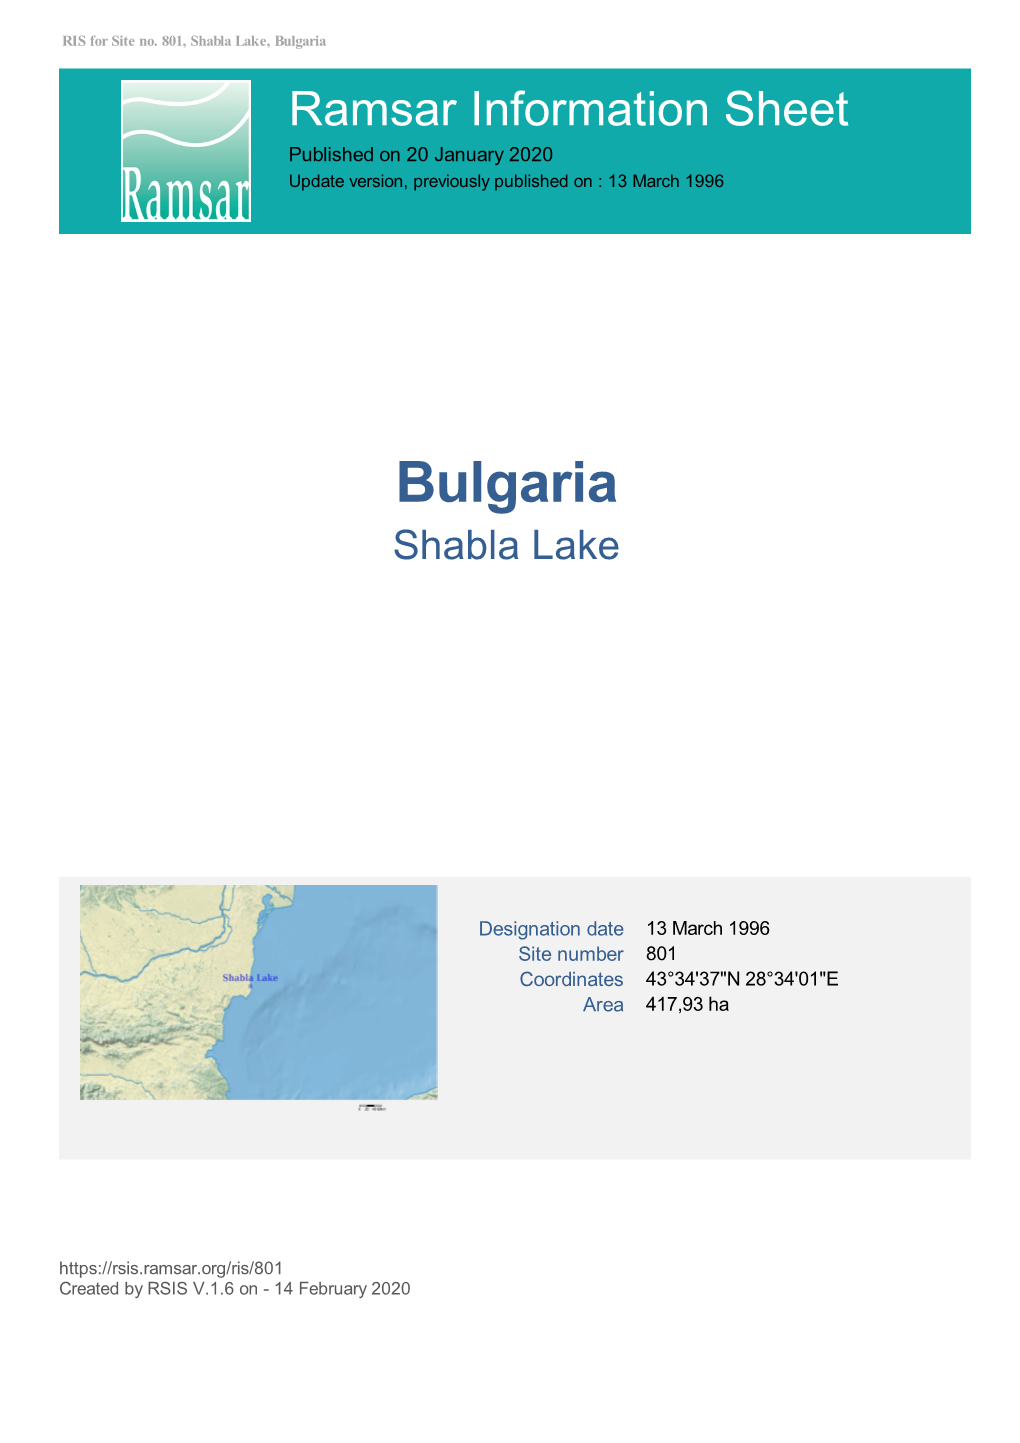 Bulgaria Ramsar Information Sheet Published on 20 January 2020 Update Version, Previously Published on : 13 March 1996